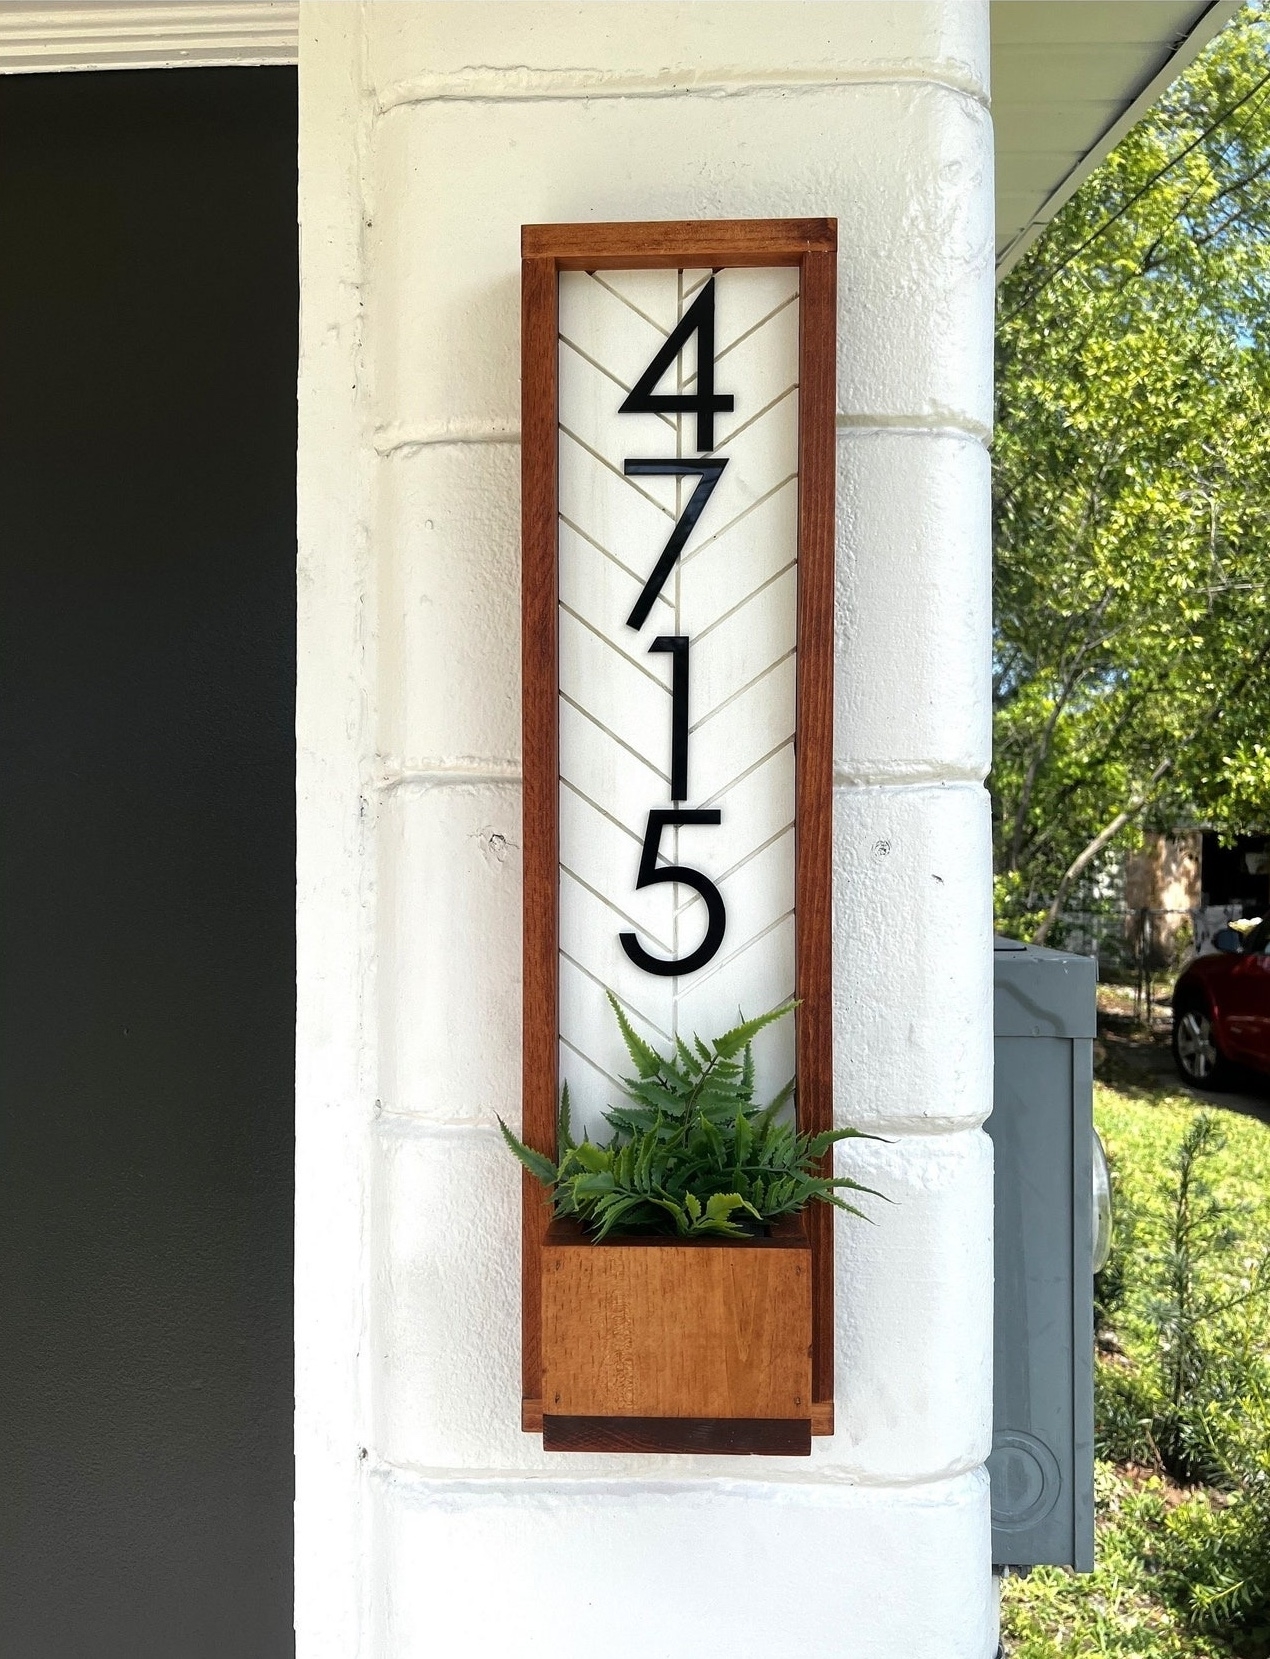 House number sign with large numerals and a built-in planter beneath the numbers